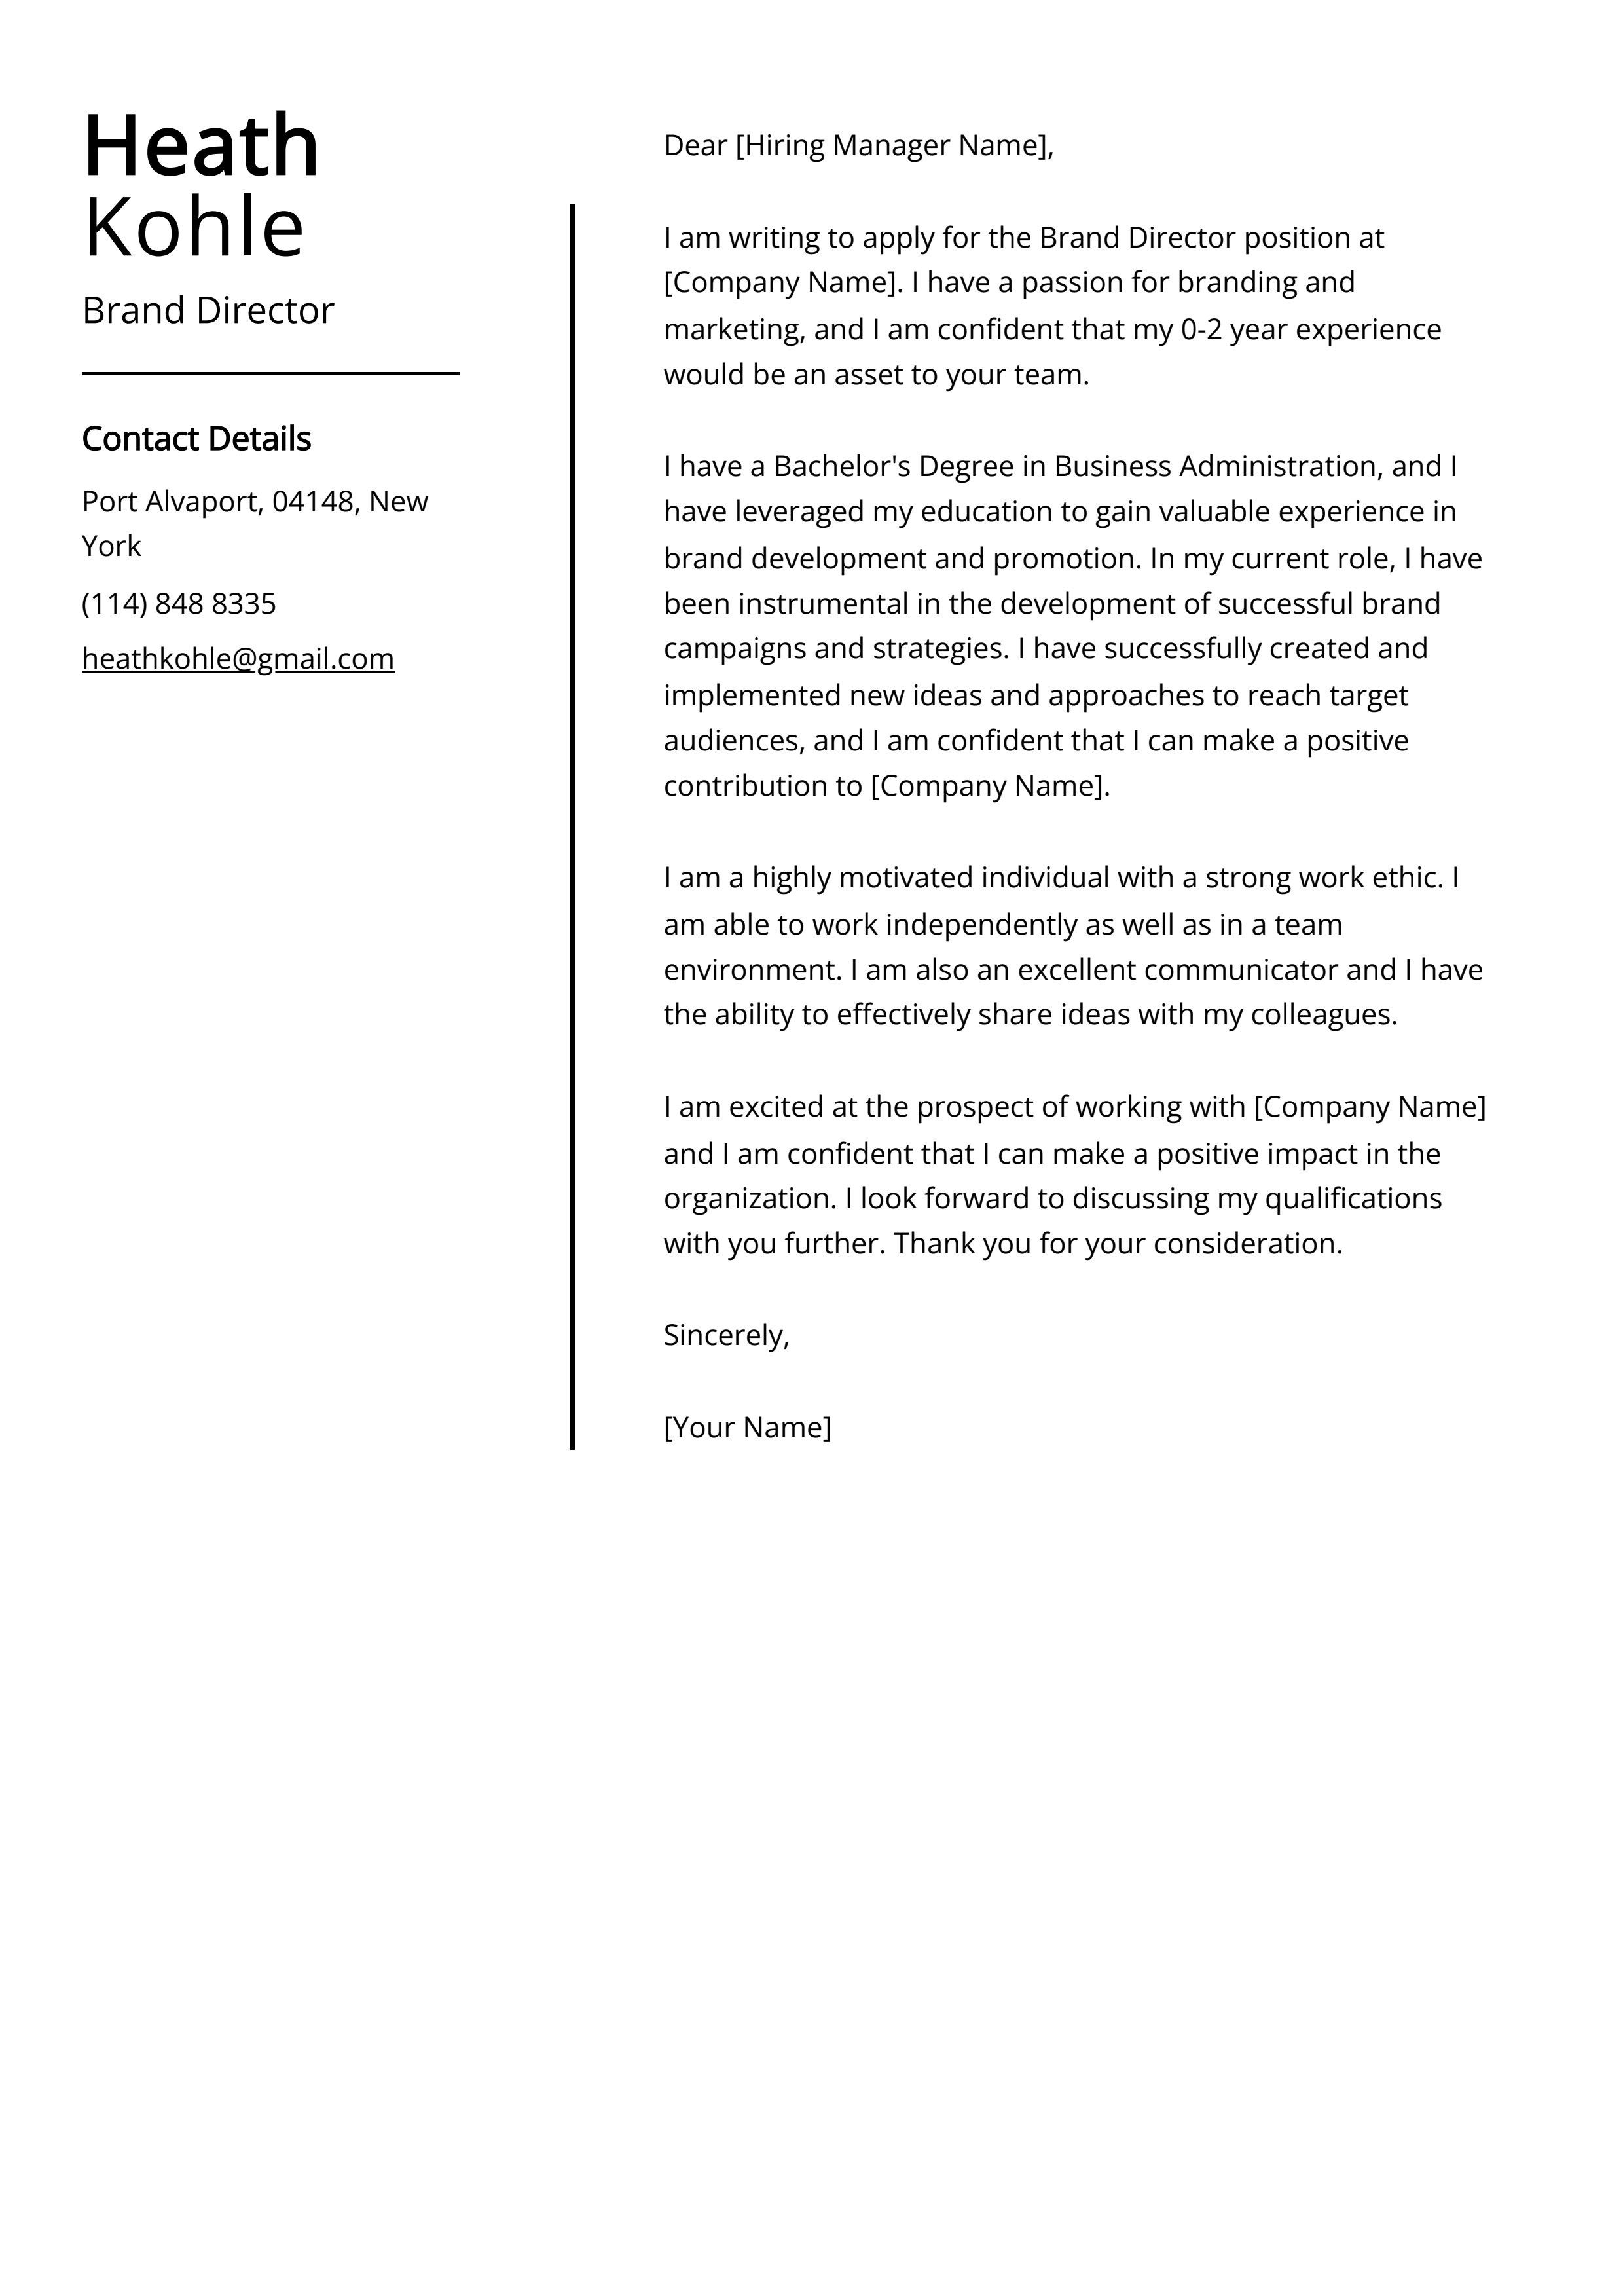 Brand Director Cover Letter Example